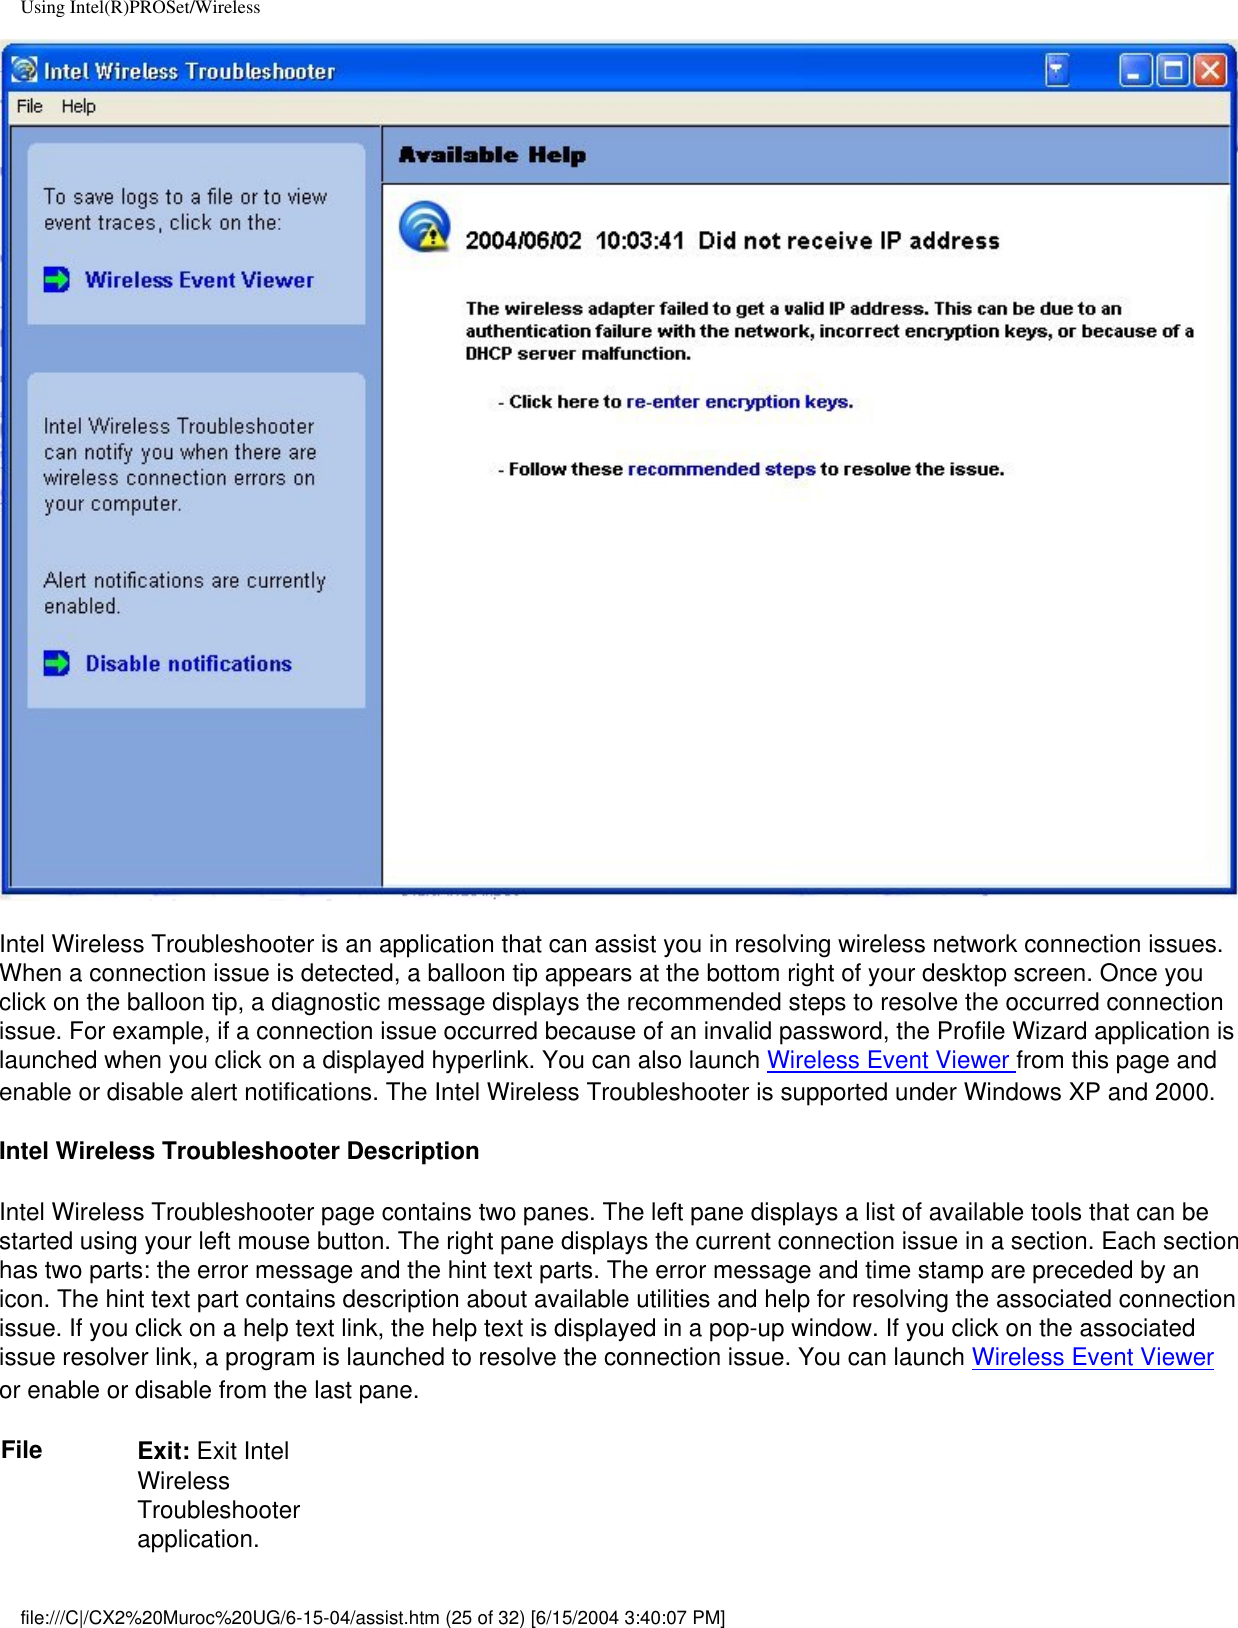 Using Intel(R)PROSet/WirelessIntel Wireless Troubleshooter is an application that can assist you in resolving wireless network connection issues. When a connection issue is detected, a balloon tip appears at the bottom right of your desktop screen. Once you click on the balloon tip, a diagnostic message displays the recommended steps to resolve the occurred connection issue. For example, if a connection issue occurred because of an invalid password, the Profile Wizard application is launched when you click on a displayed hyperlink. You can also launch Wireless Event Viewer from this page and enable or disable alert notifications. The Intel Wireless Troubleshooter is supported under Windows XP and 2000.Intel Wireless Troubleshooter DescriptionIntel Wireless Troubleshooter page contains two panes. The left pane displays a list of available tools that can be started using your left mouse button. The right pane displays the current connection issue in a section. Each section has two parts: the error message and the hint text parts. The error message and time stamp are preceded by an icon. The hint text part contains description about available utilities and help for resolving the associated connection issue. If you click on a help text link, the help text is displayed in a pop-up window. If you click on the associated issue resolver link, a program is launched to resolve the connection issue. You can launch Wireless Event Viewer or enable or disable from the last pane.File Exit: Exit Intel Wireless Troubleshooter application.file:///C|/CX2%20Muroc%20UG/6-15-04/assist.htm (25 of 32) [6/15/2004 3:40:07 PM]